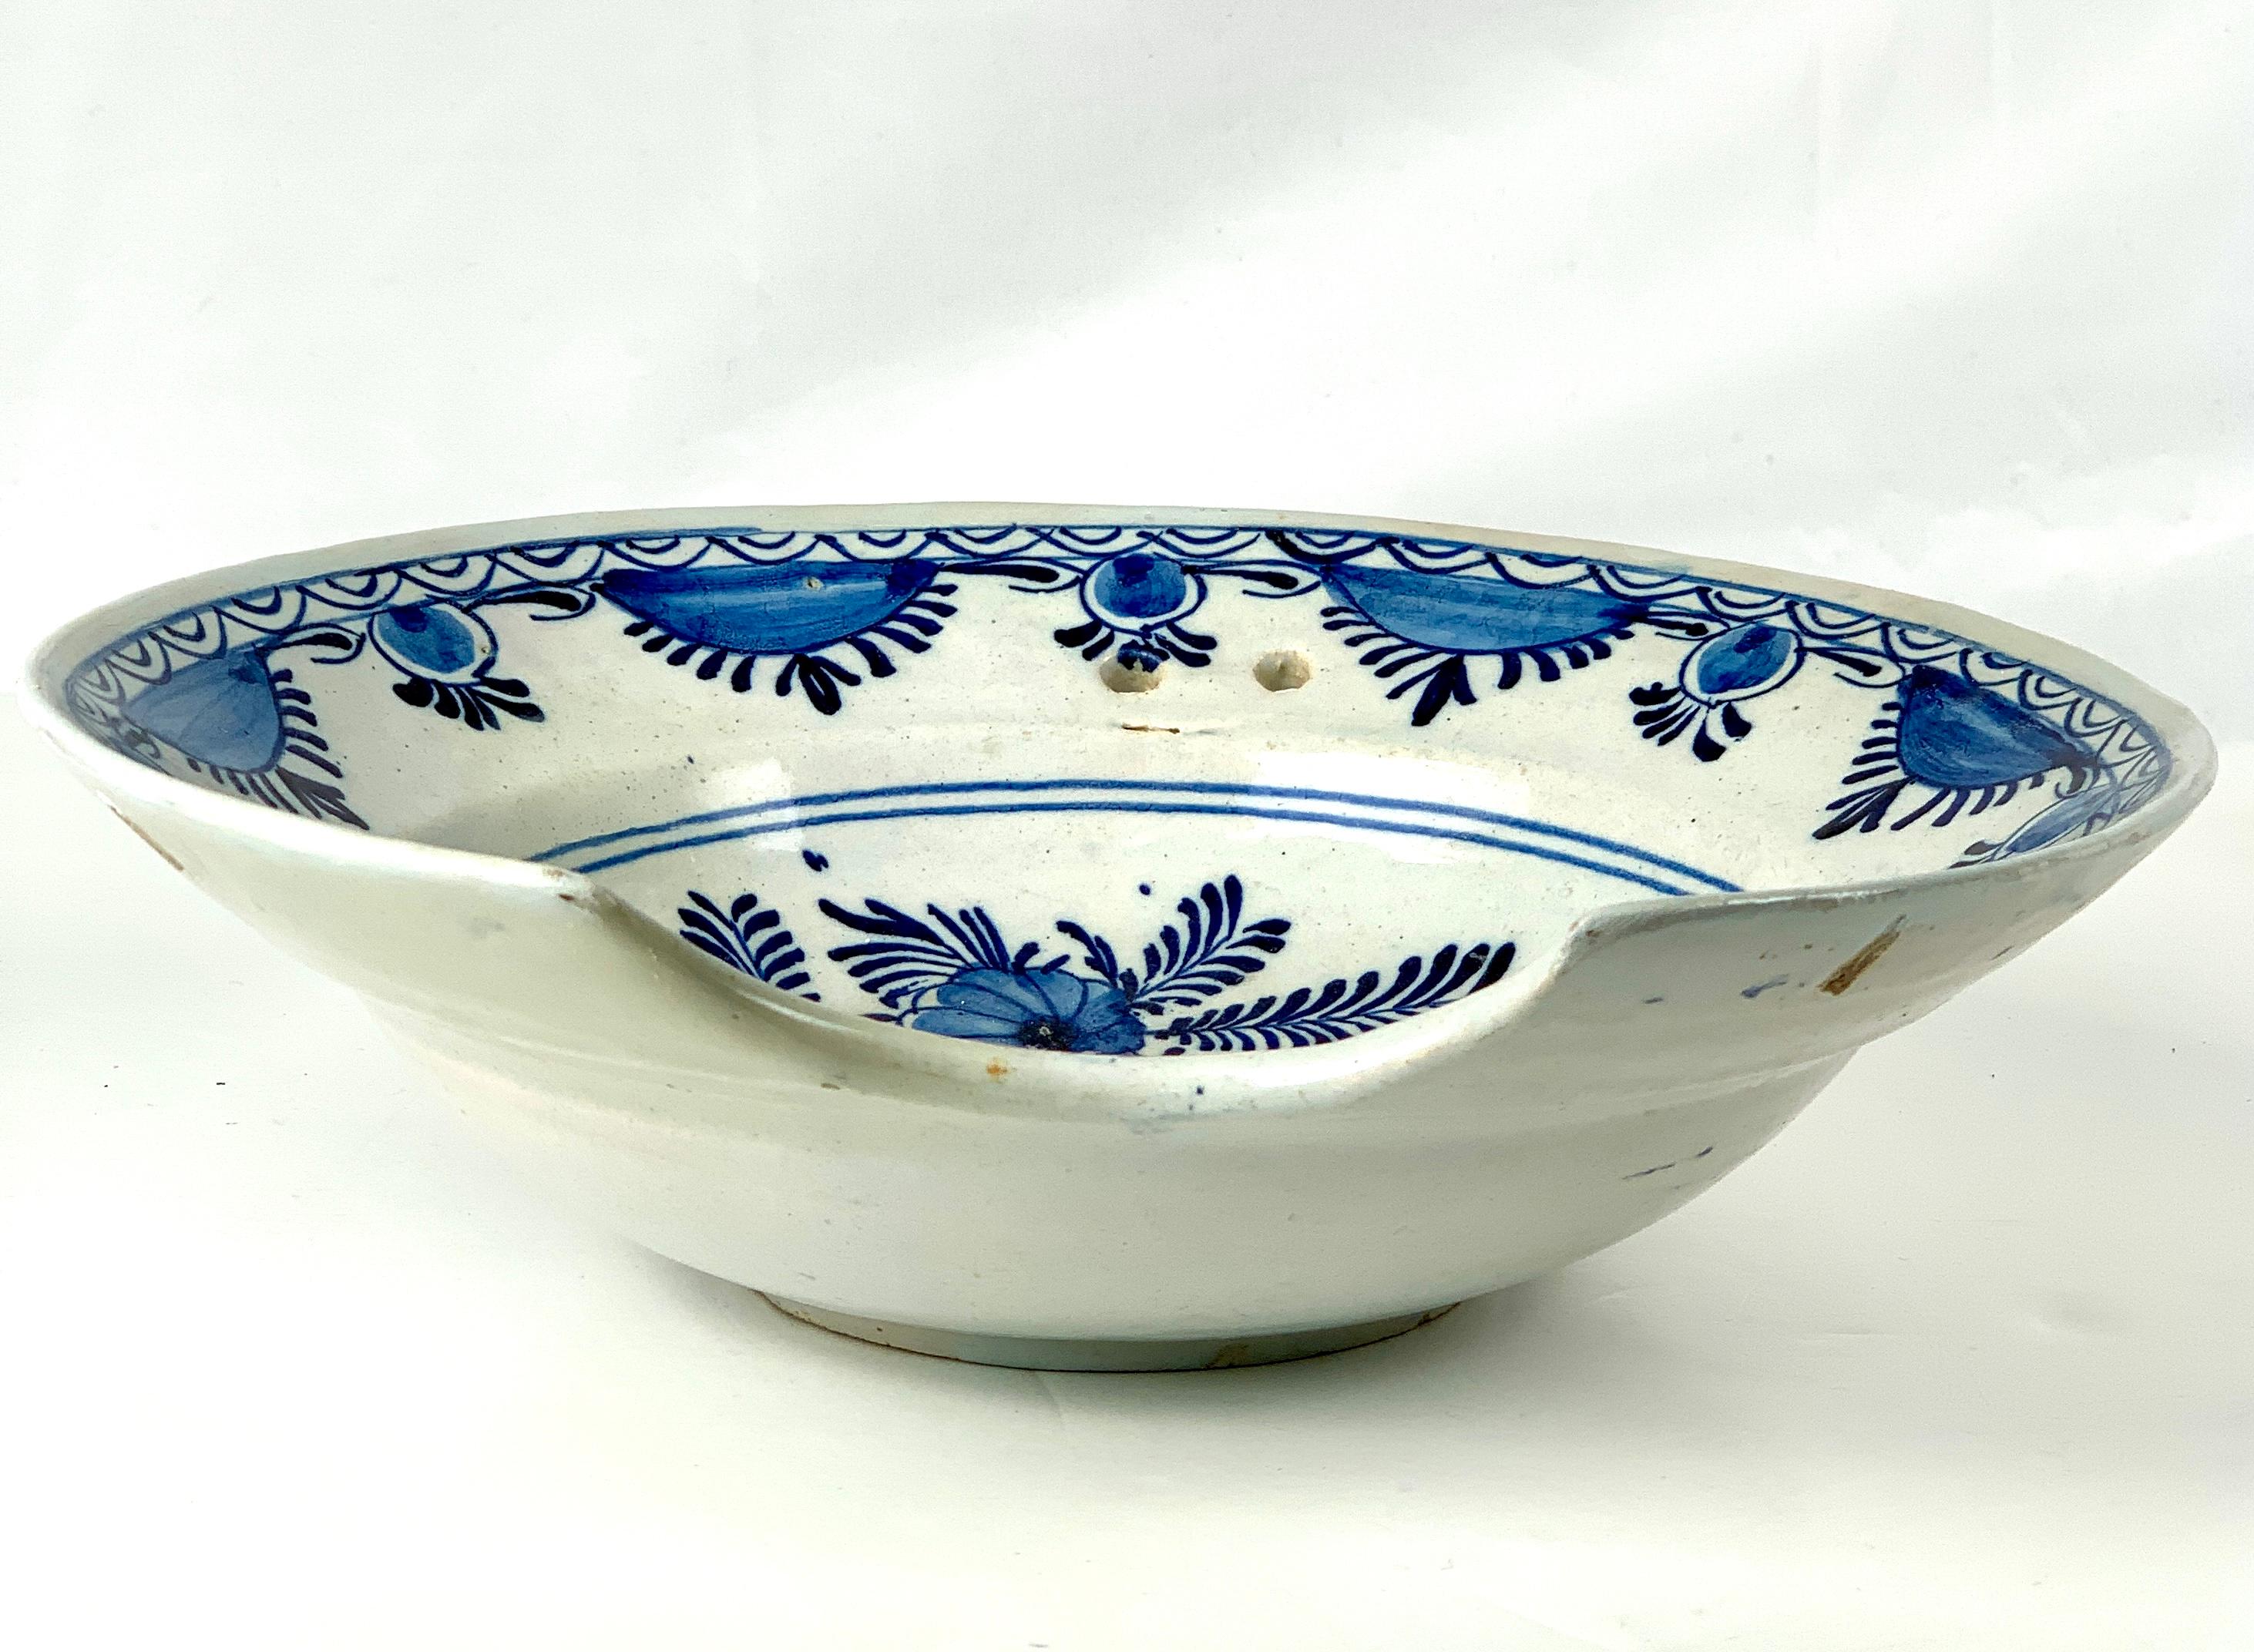 This blue and white Dutch Delft barber's bowl (scheerbekken) is a beautiful and fascinating artifact that provides insight into the history of barbers in the late 18th century (circa 1780) and the decorative arts of the Dutch during this period.
The